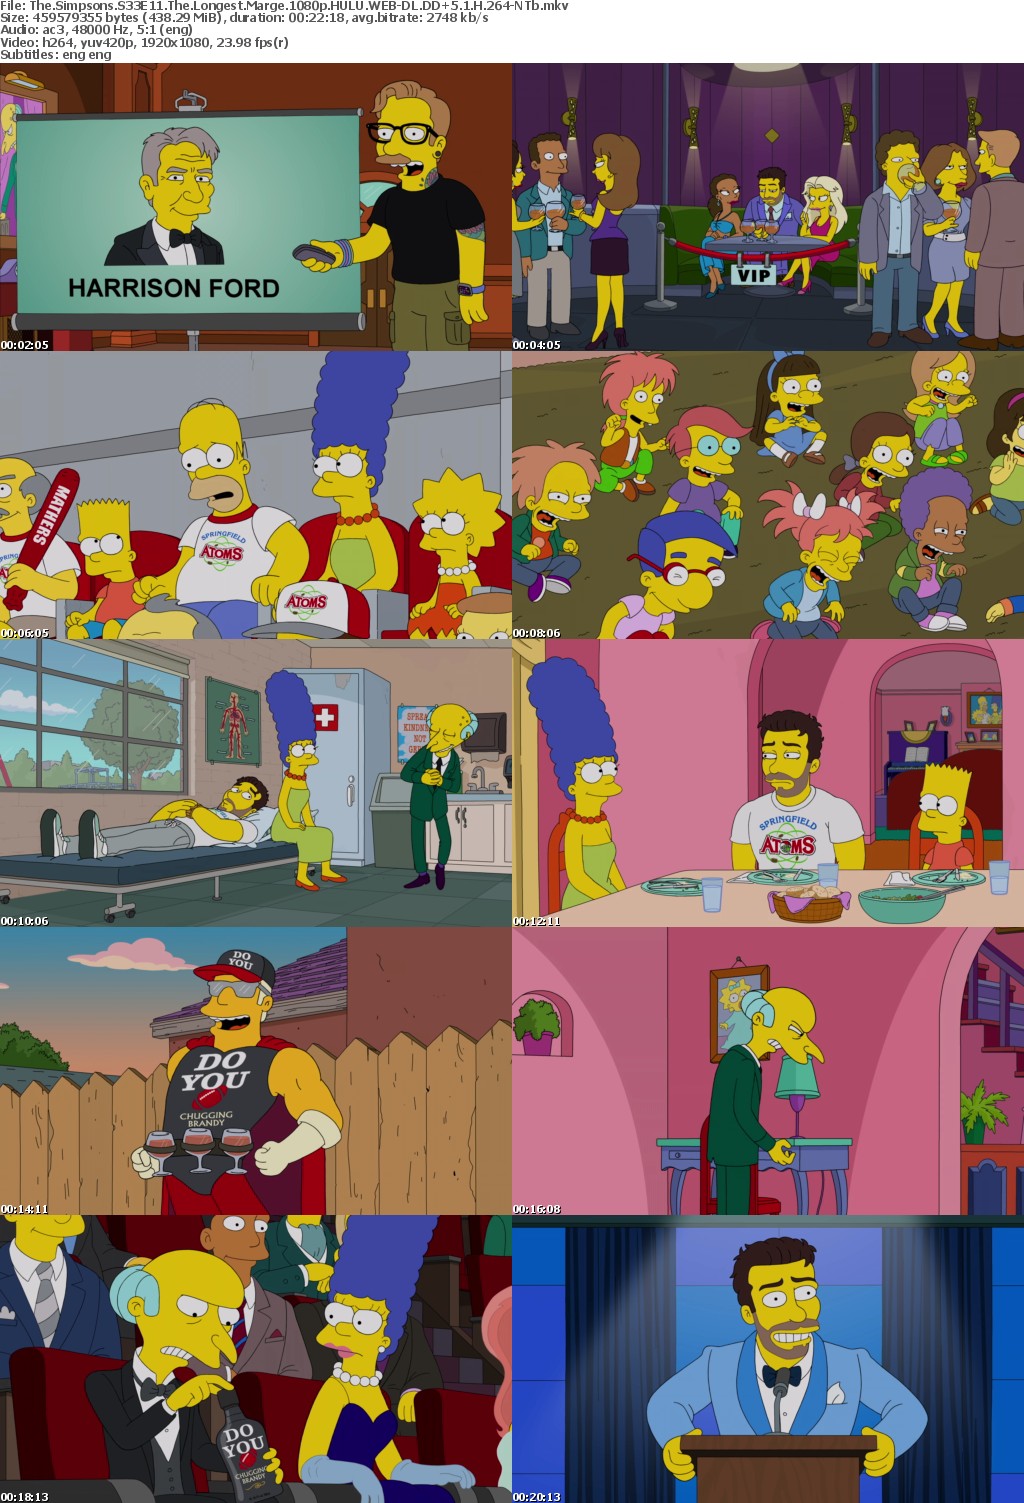 The Simpsons S33E11 The Longest Marge 1080p HULU WEBRip DDP5 1 x264-NTb